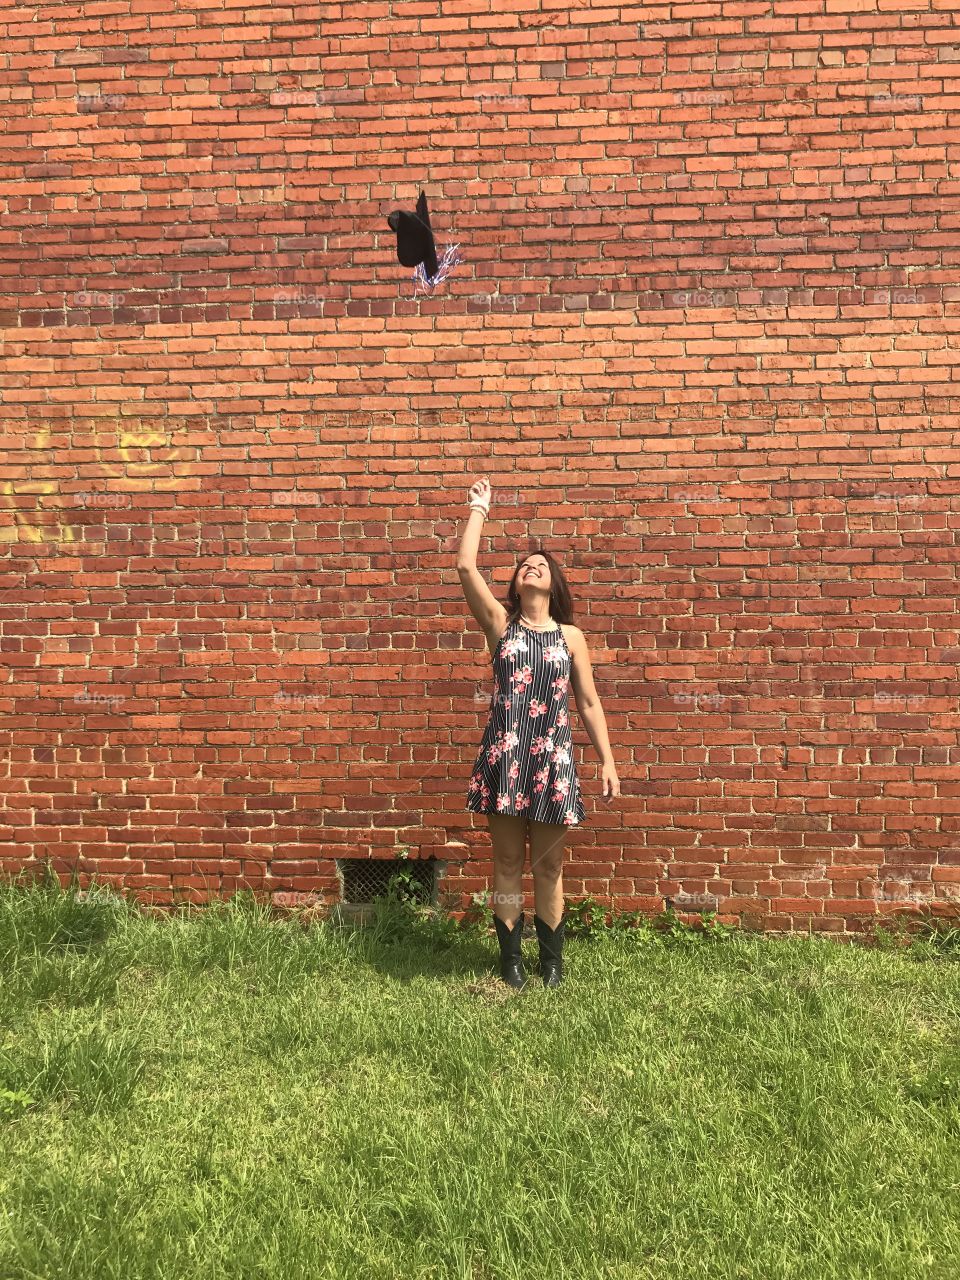 Tossing Graduation hat in air